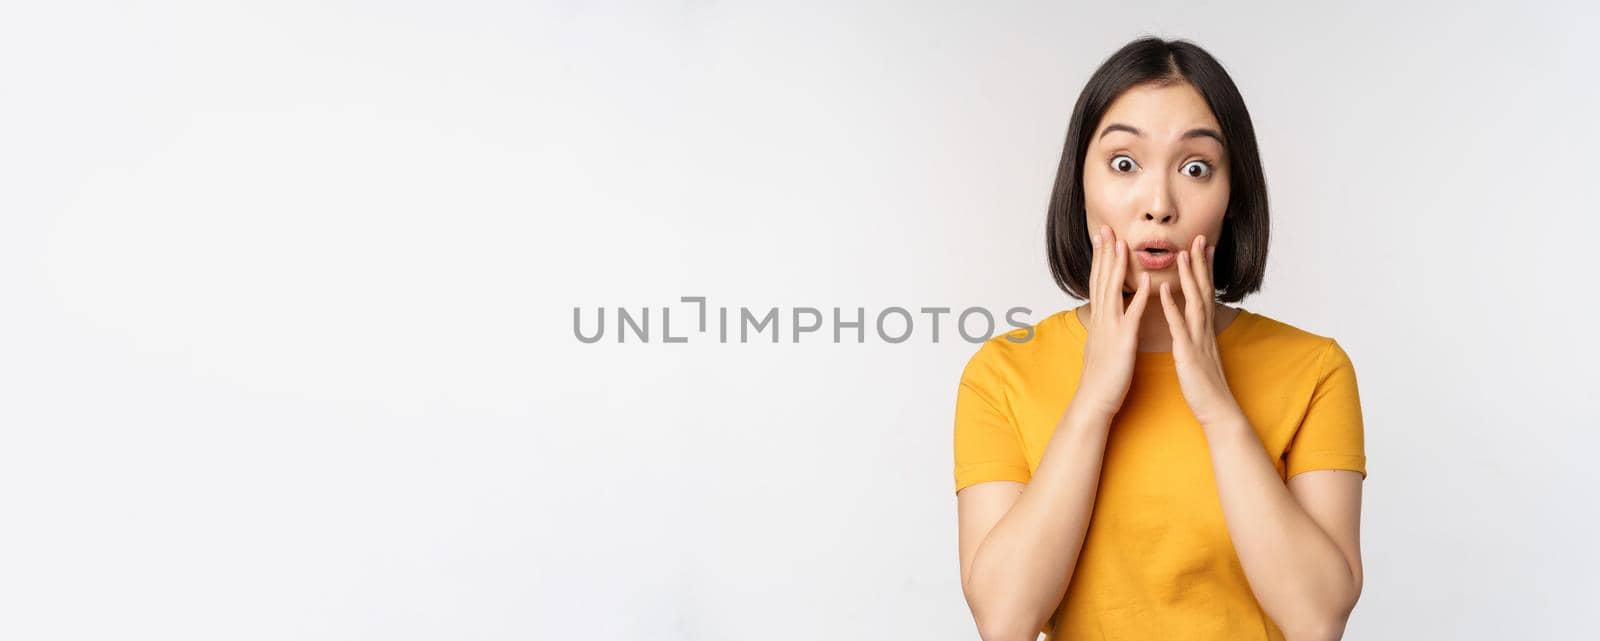 Close up portrait of asian woman looking surprised, wow face, staring impressed at camera, standing over white background in yellow t-shirt.